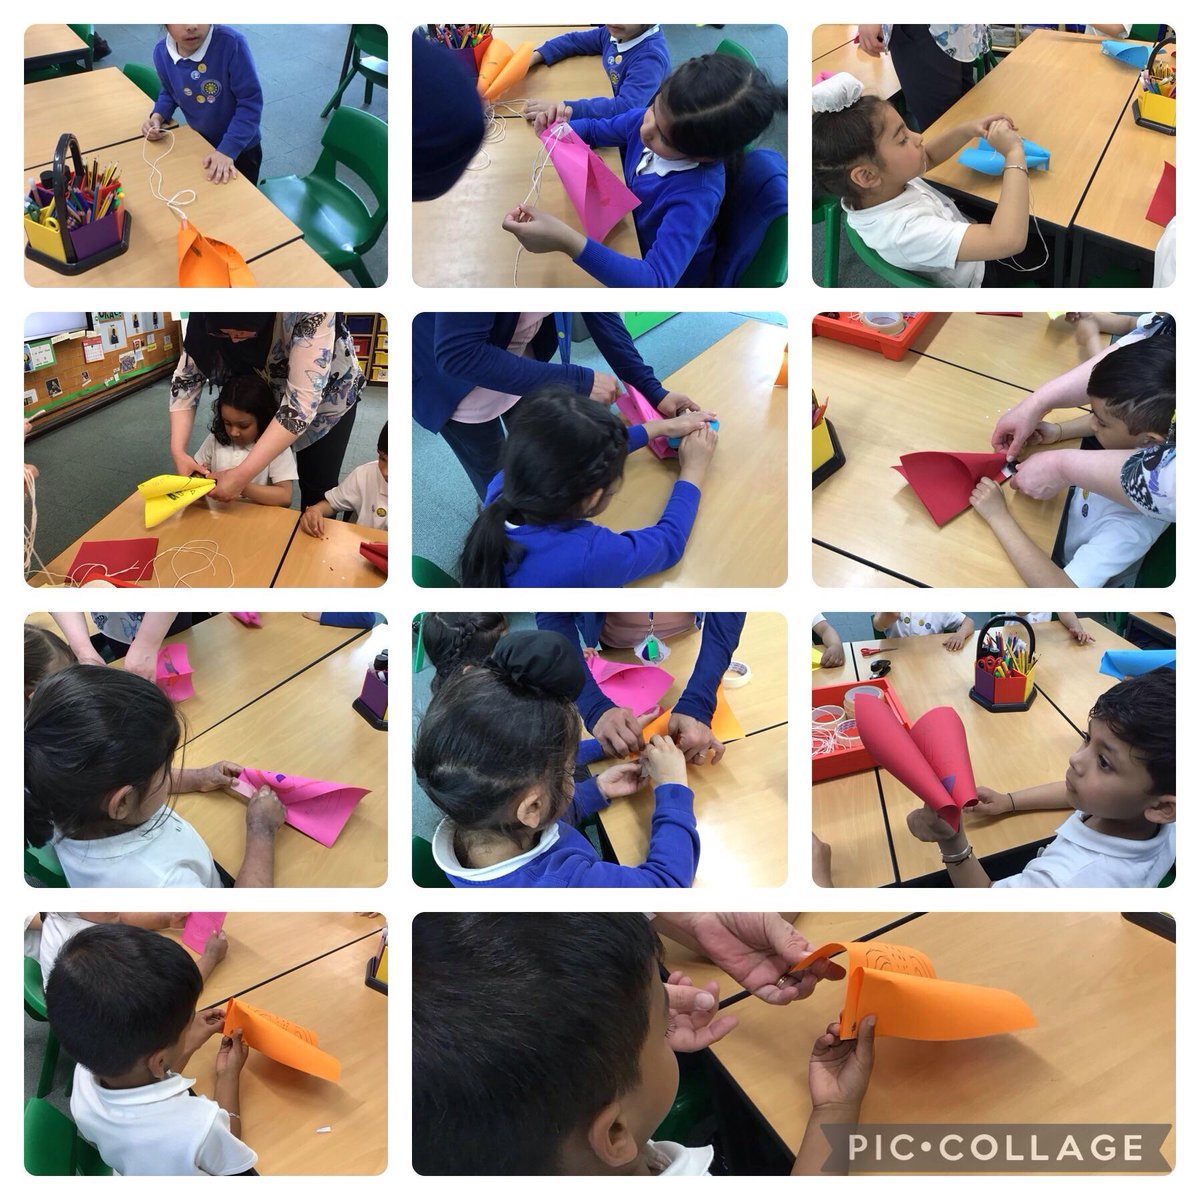 This afternoon in DT we made our own kites. We will test them tomorrow! @DevonshireInf